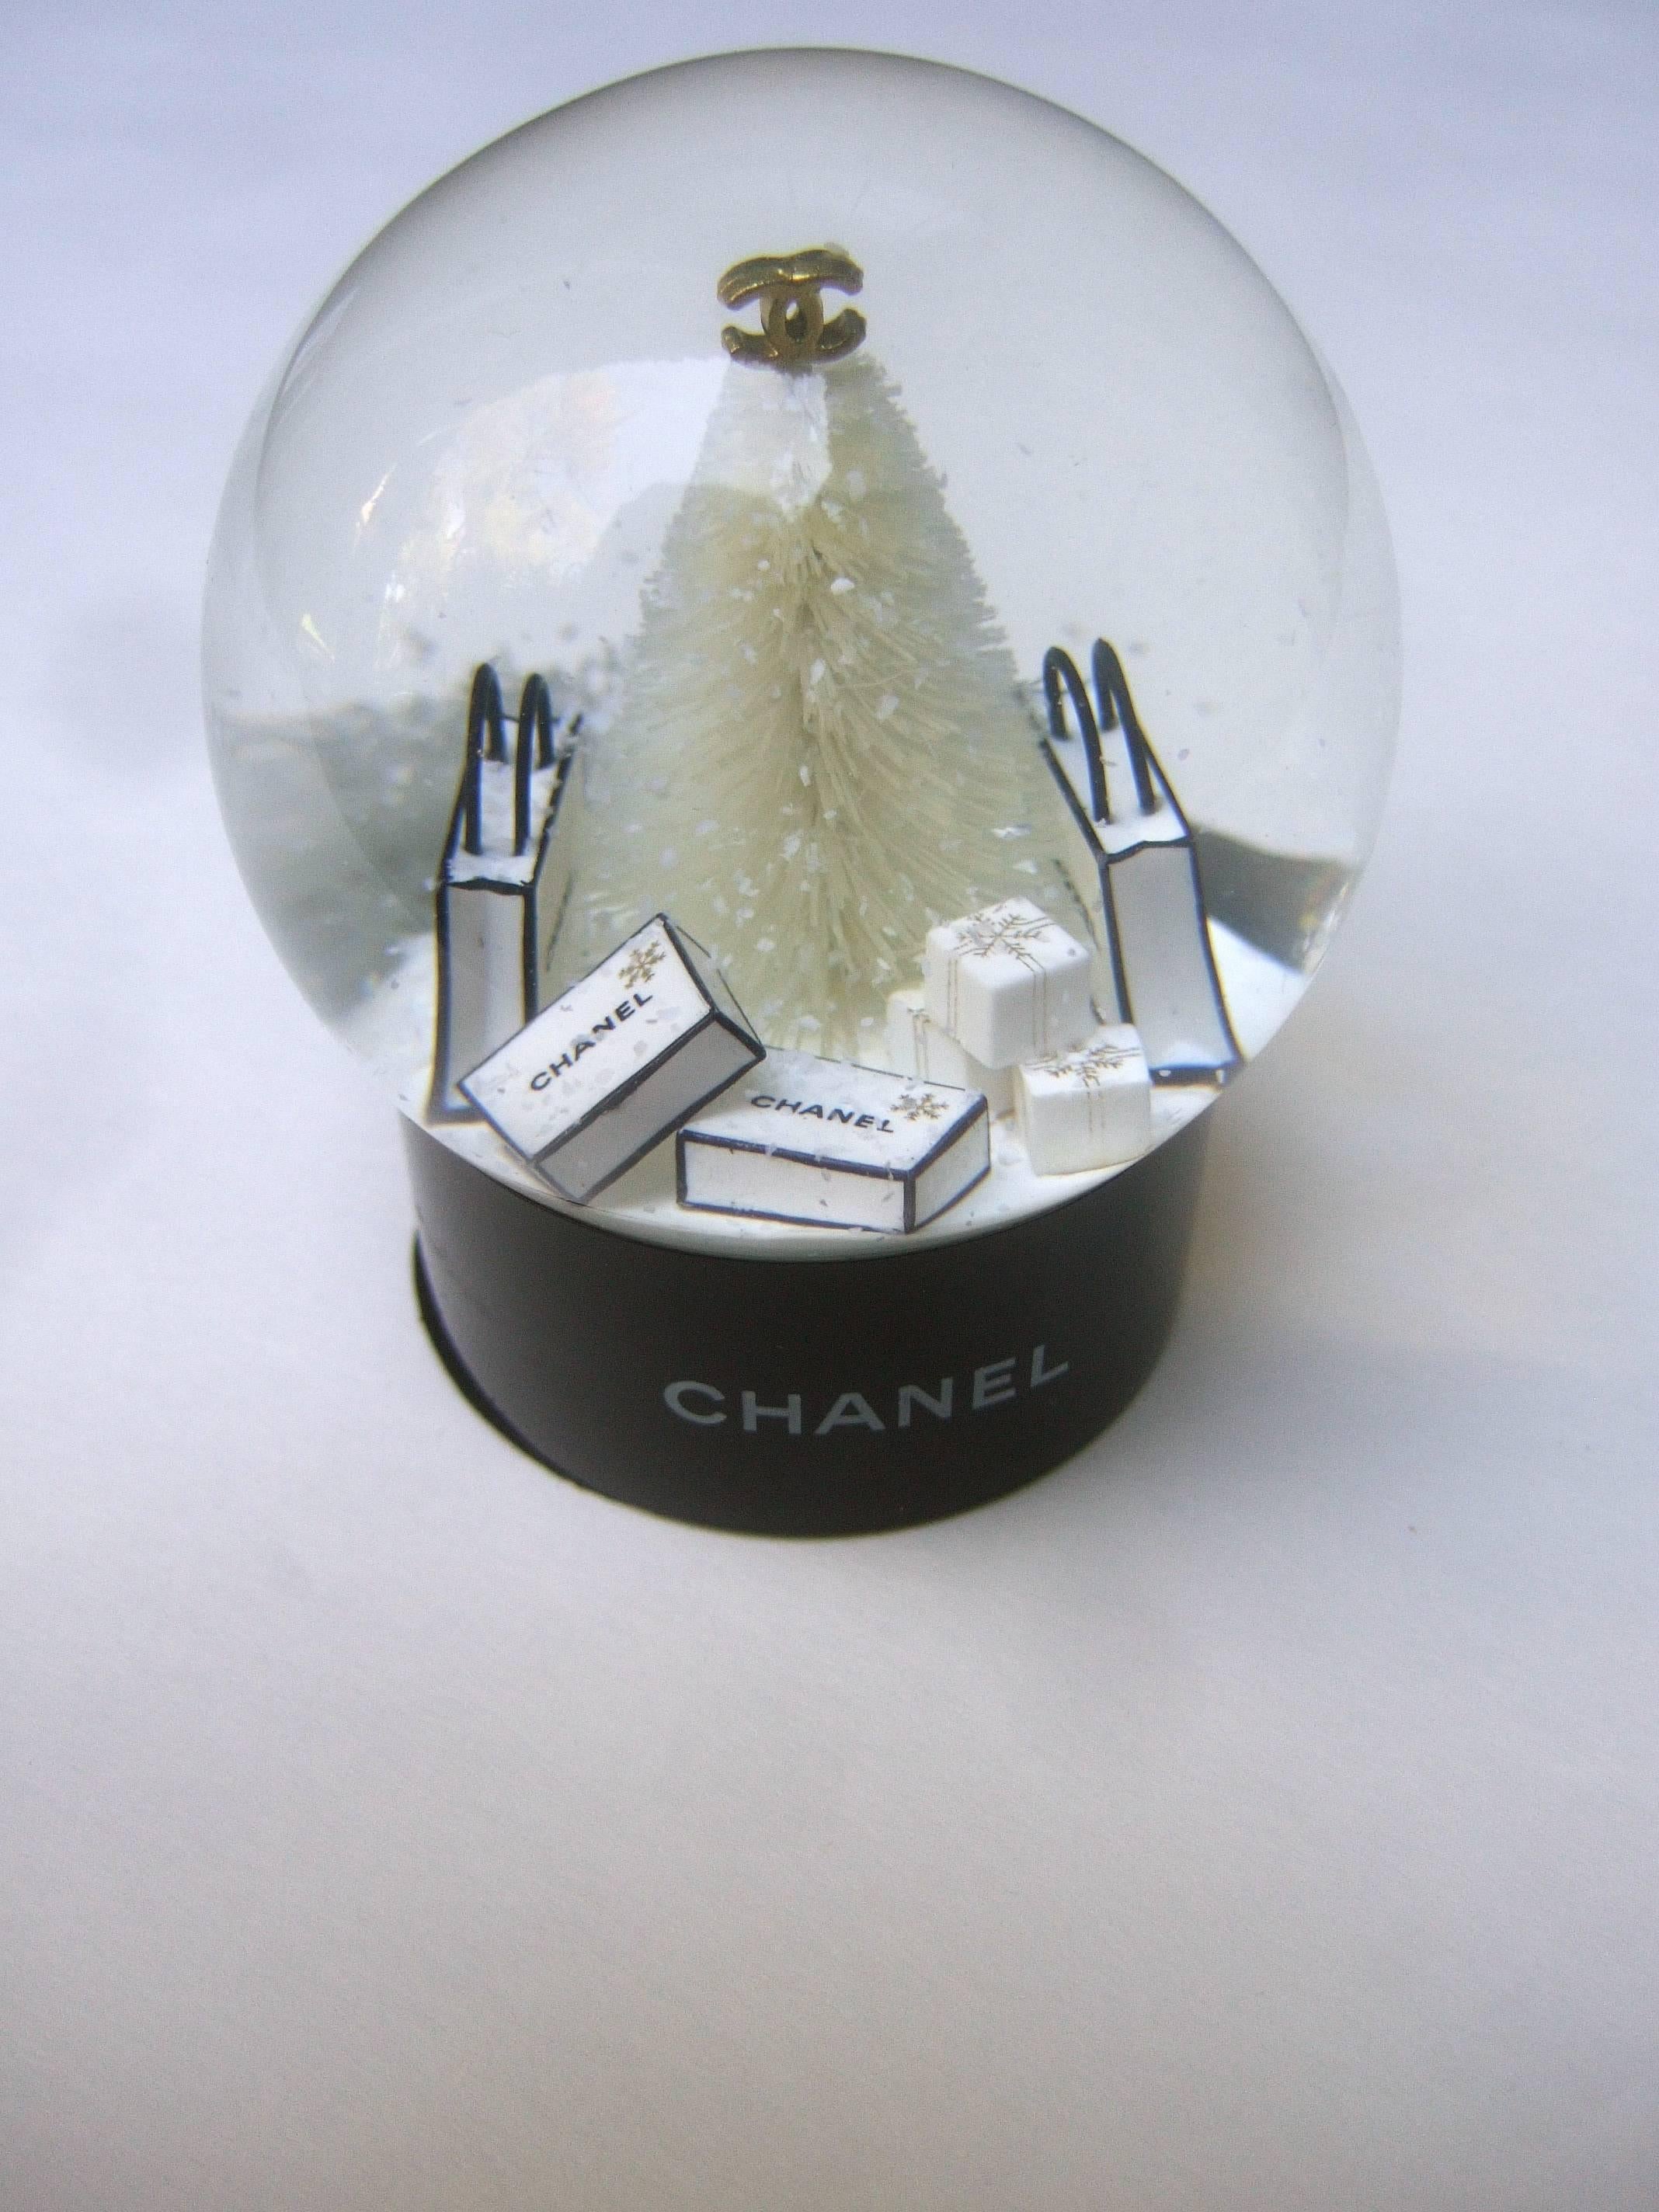 Chanel miniature Christmas tree snow globe 
The stylish crystal orb features a fluffy
white Christmas tree with Chanel's
interlocked gilt initials on the top

Surrounding the white snow covered 
Christmas tree are a collection of